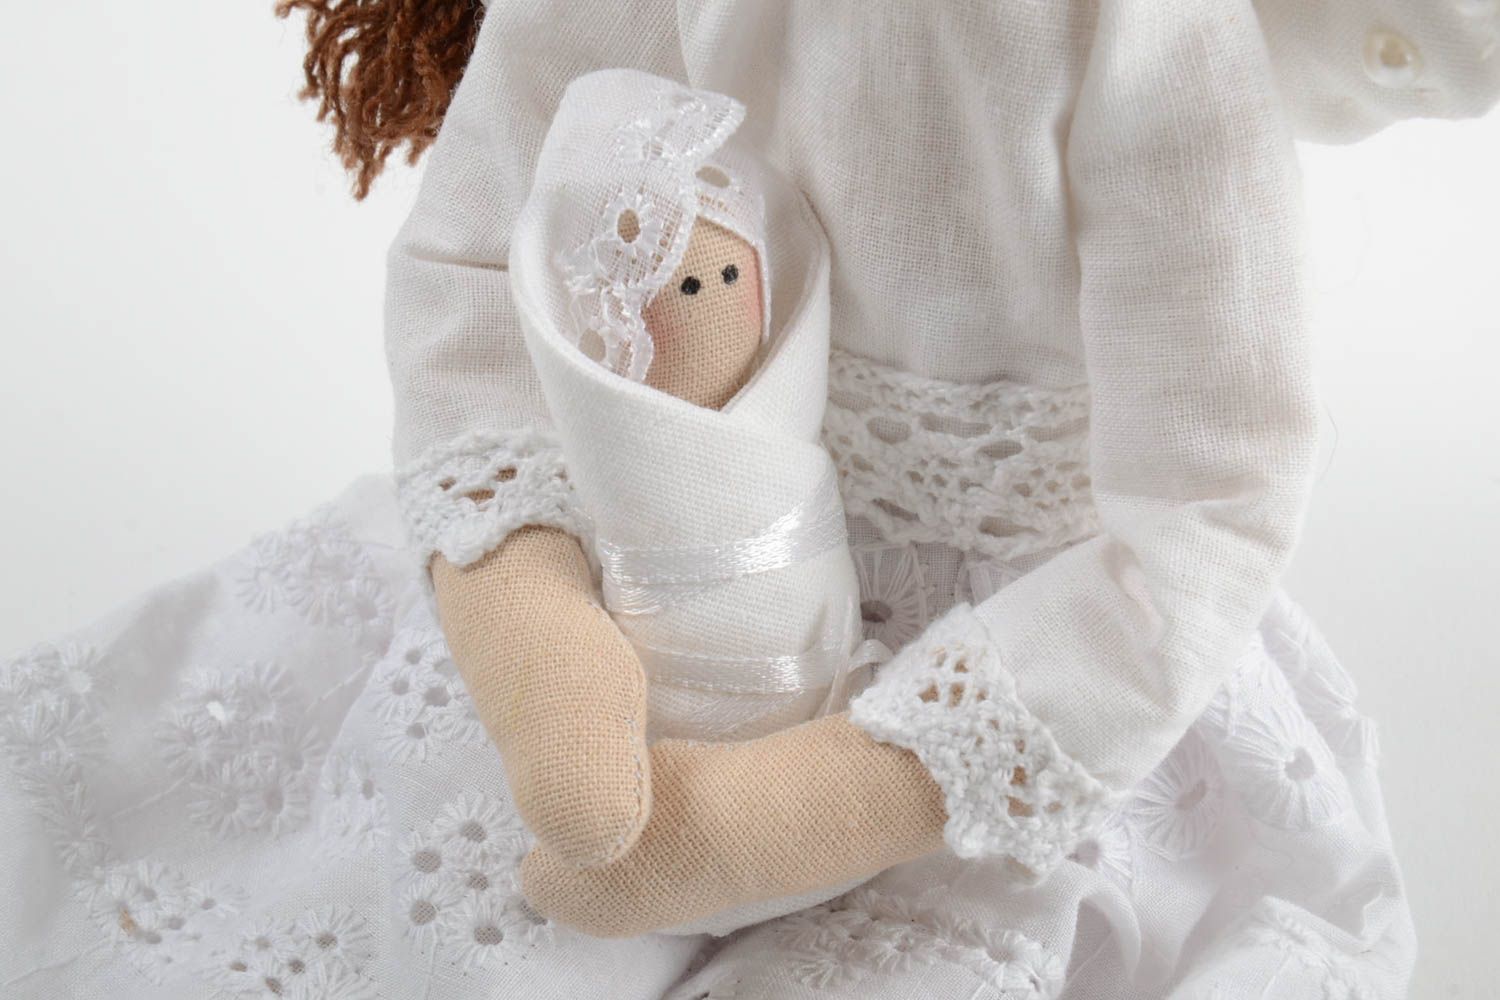 Beautiful handmade interior fabric doll decorative soft toy gifts for her photo 3